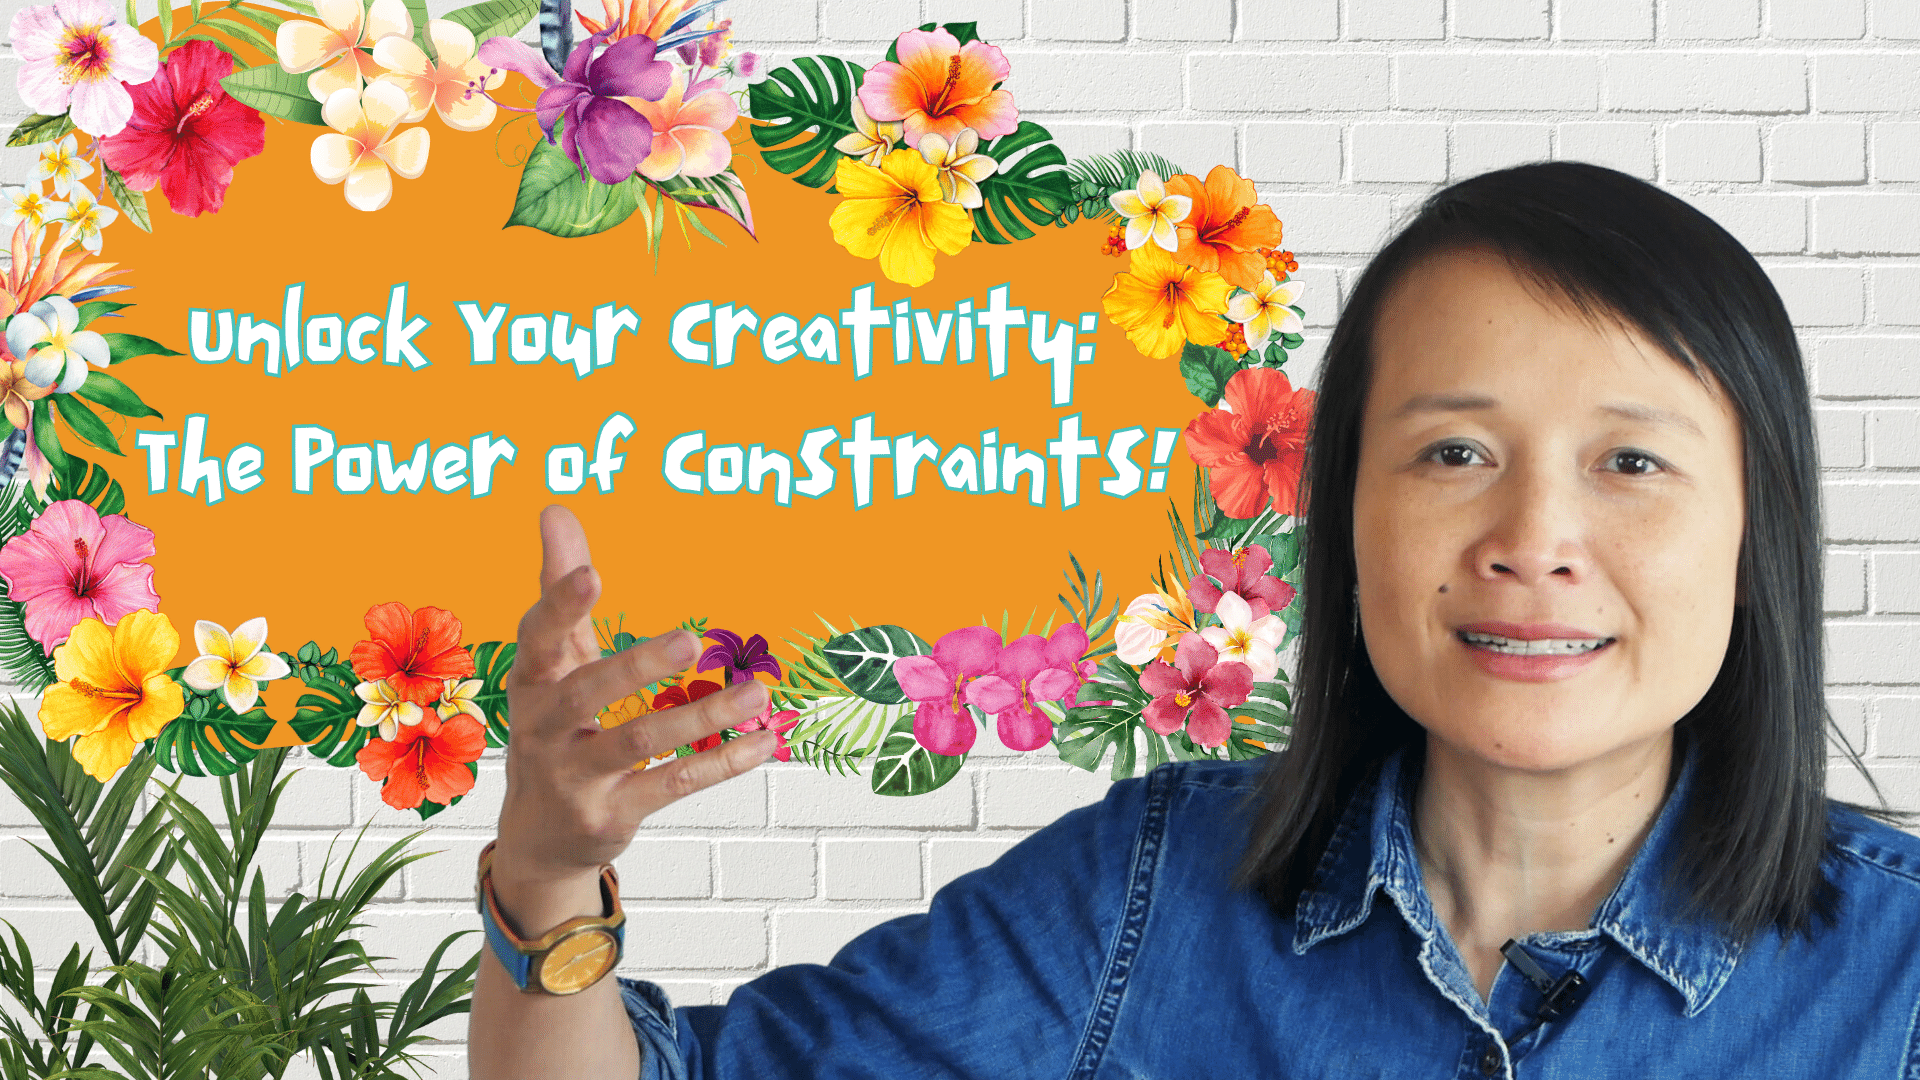 Unlock Your Creativity: The Power of Constraints